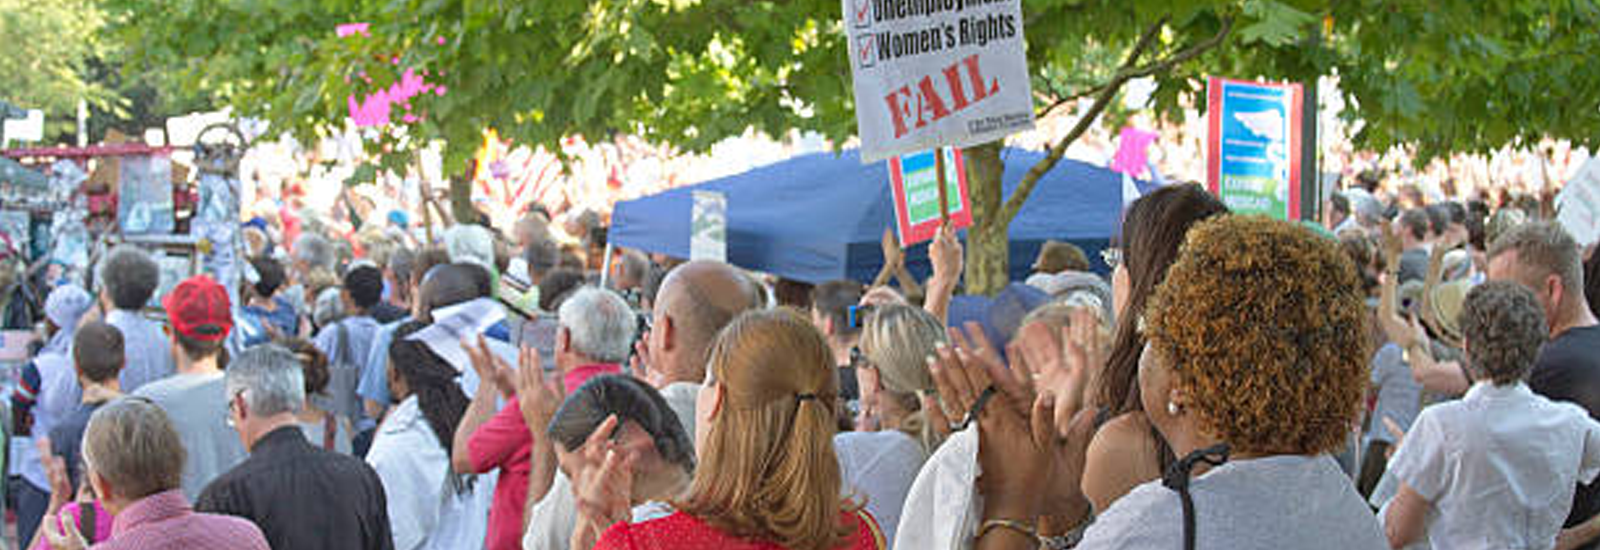 Photograph of crowd outdoors protesting